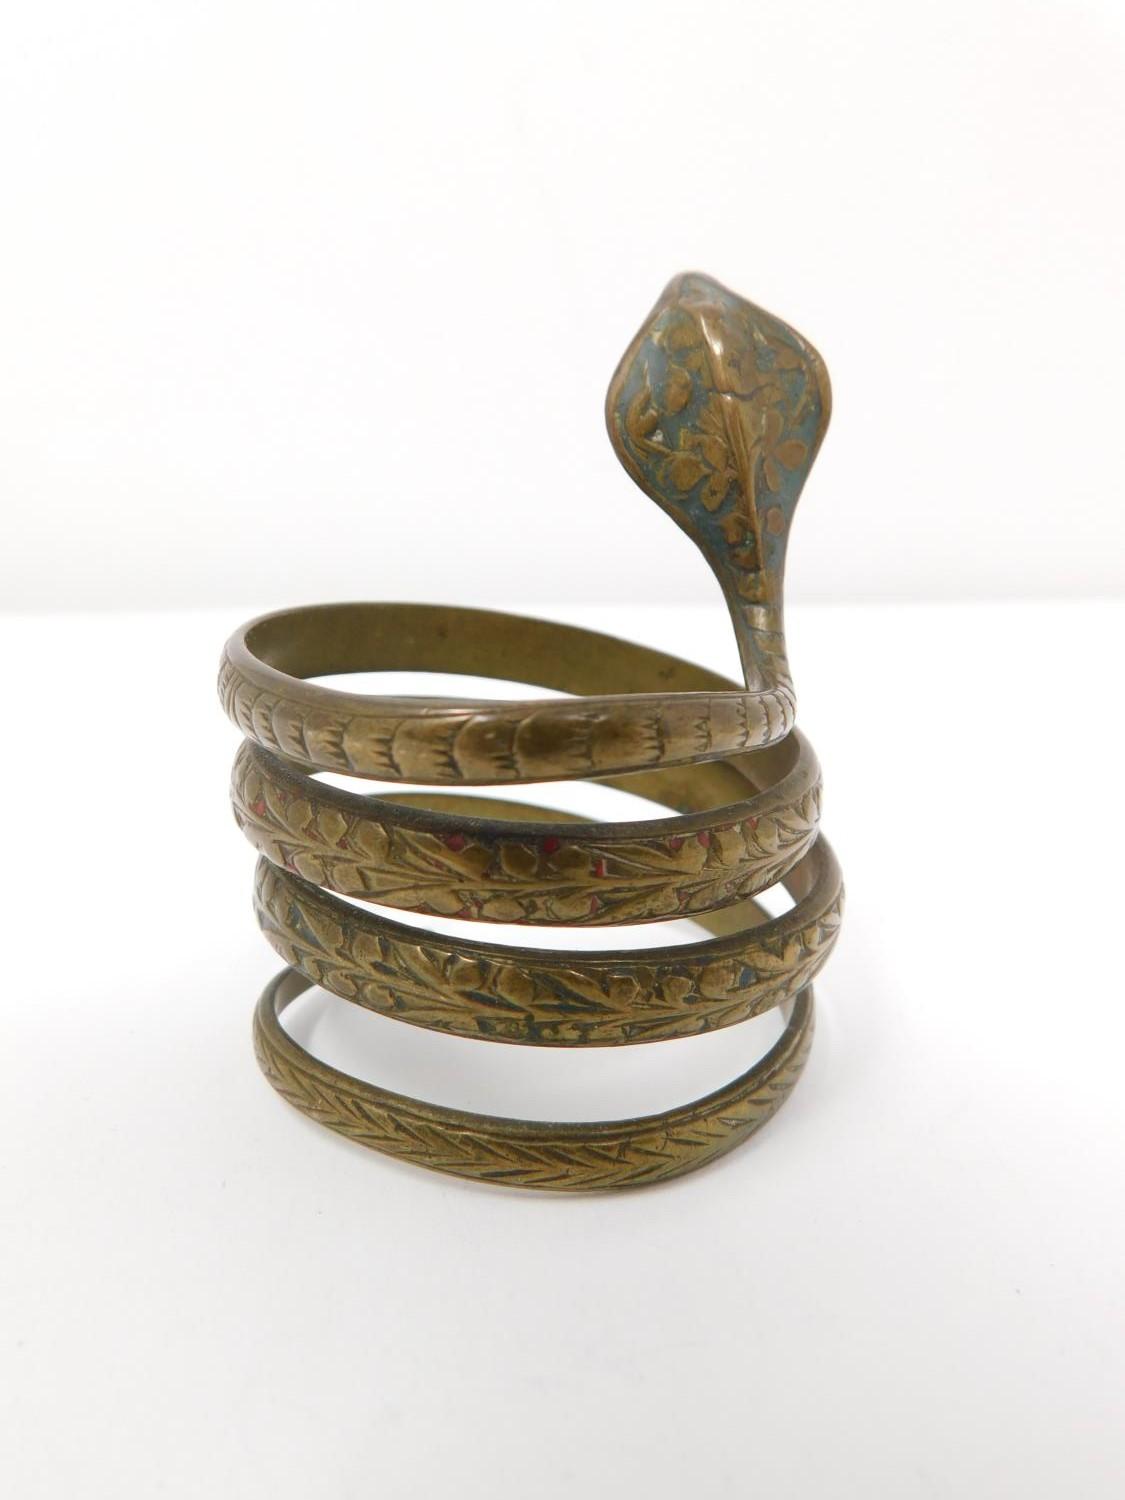 A collection of vintage jewellery inlcuding an 18 carat rolled gold bangle with star cur design, a - Image 13 of 28